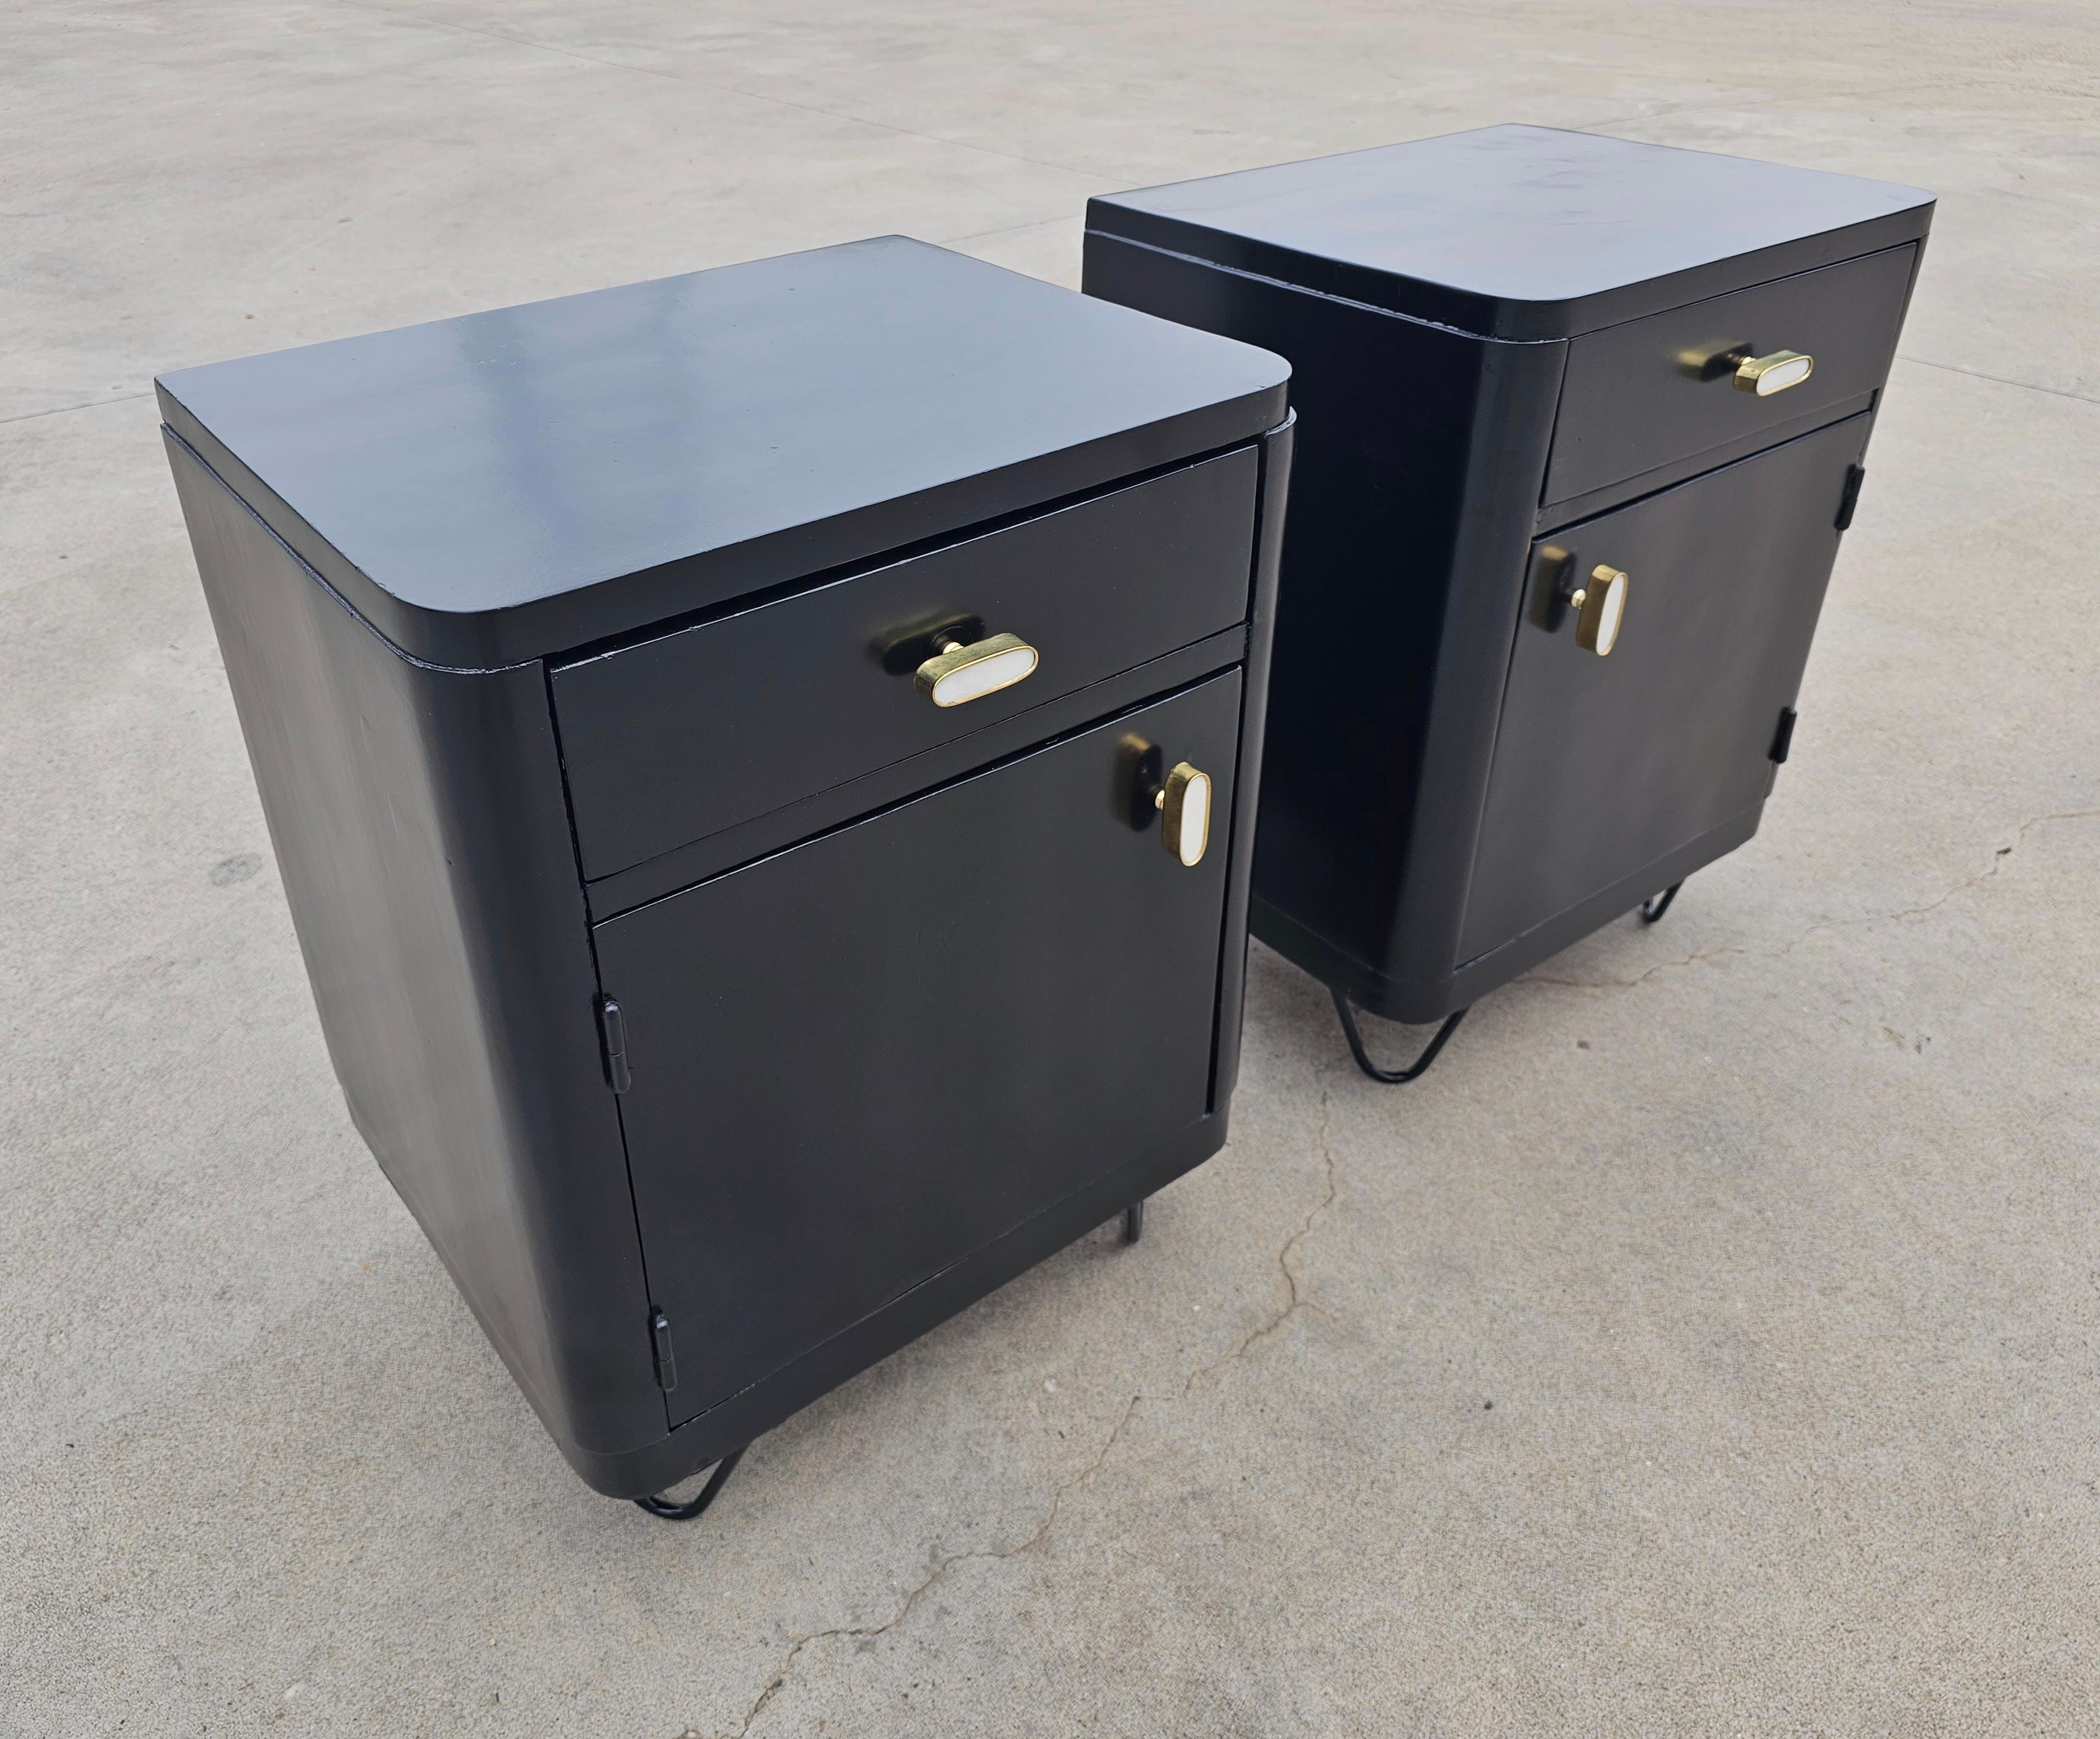 In this listing you will find a pair of gorgeous Art Deco Nightstands. They feature beautiful, minimalist shape, with one small drawer and a cabinet beneath it. The nightstands were recently refurbished and painted black. new door knobs made of